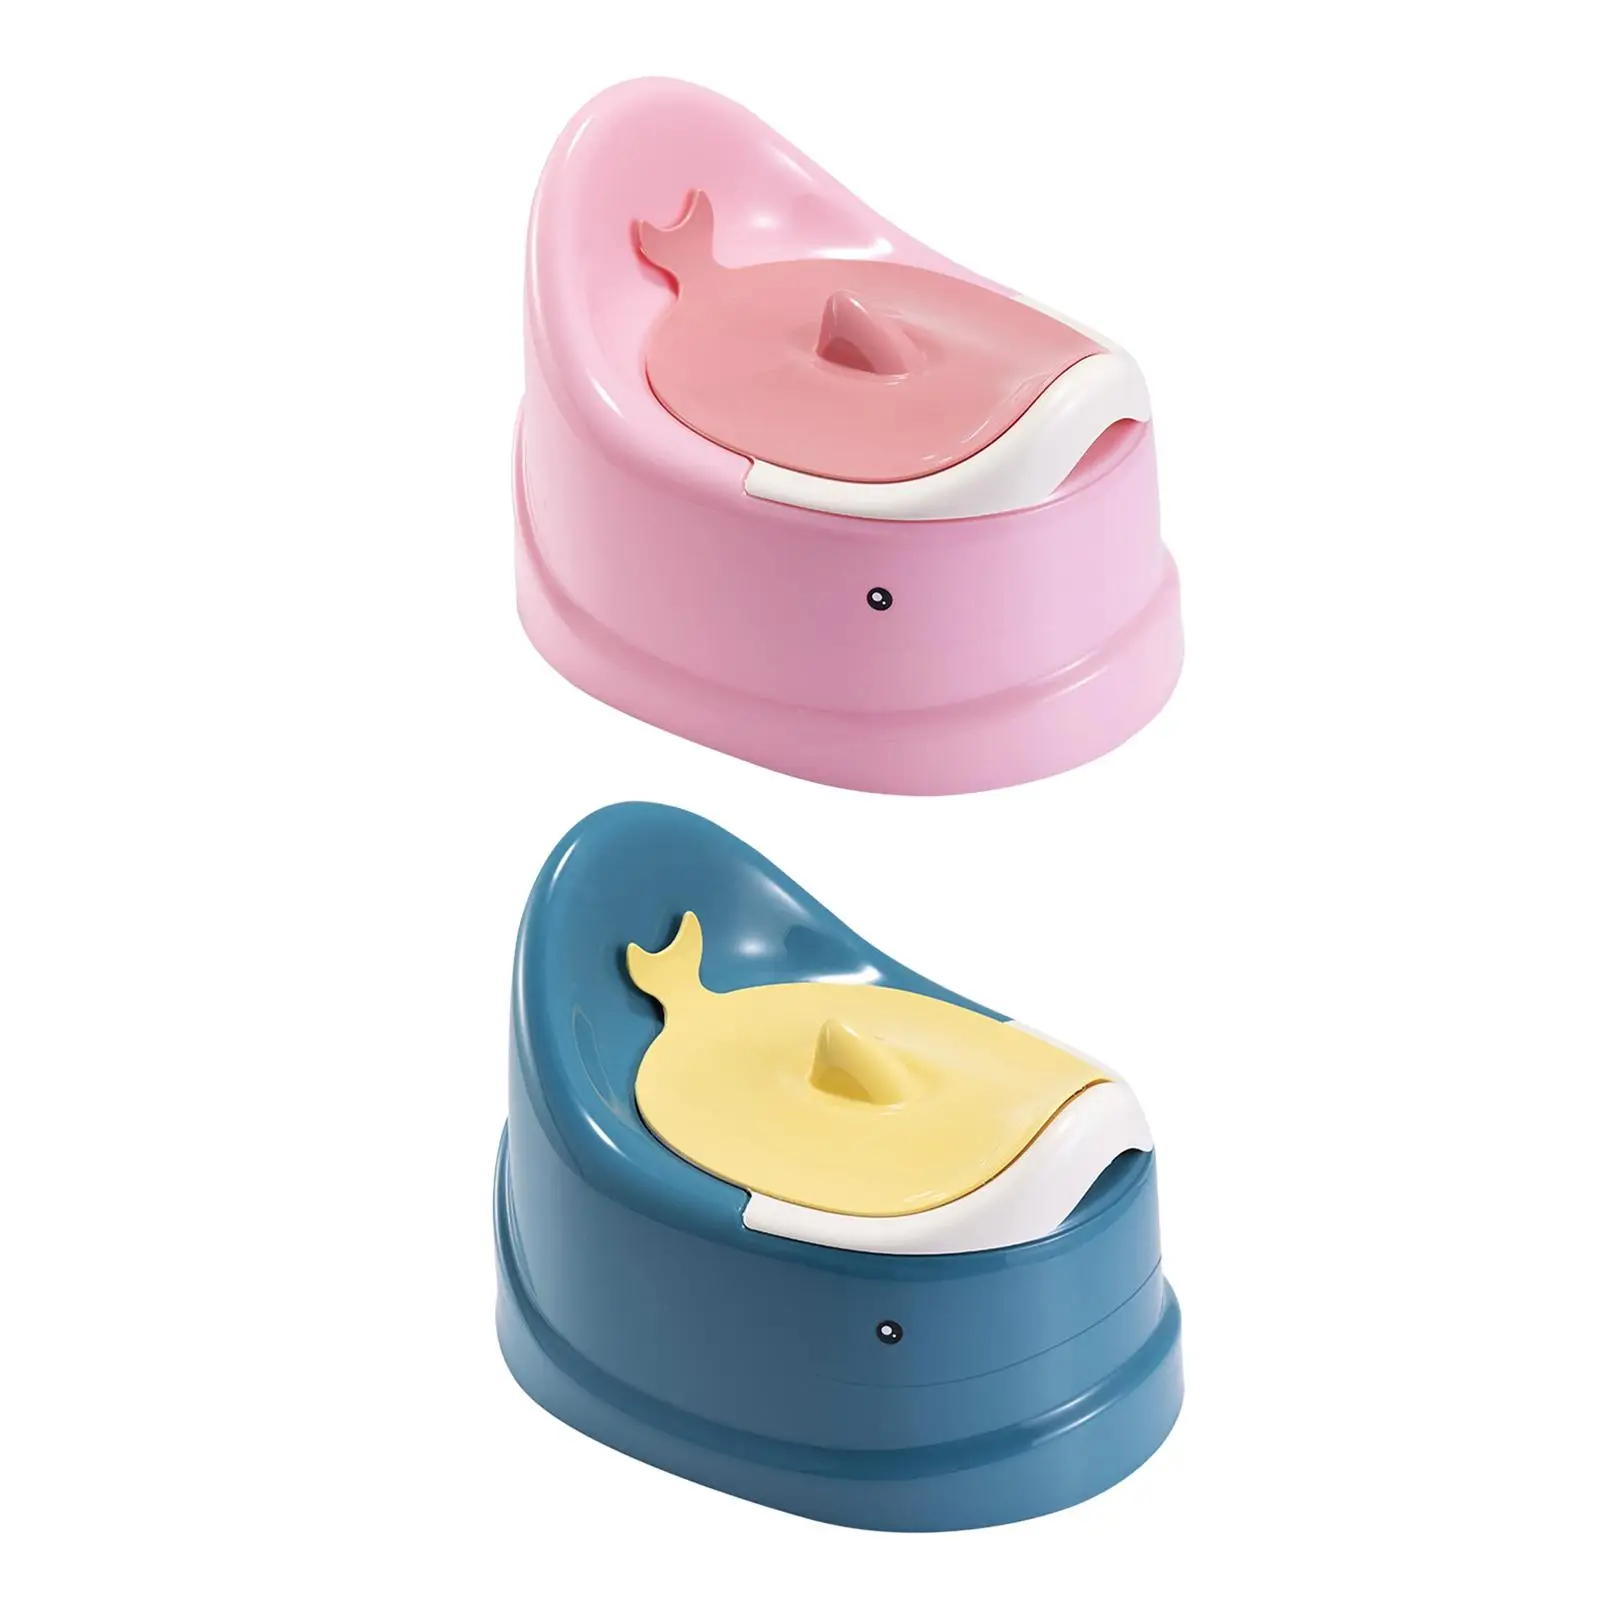 Potty Training Toilet Lovely for Toddlers Indoor Travel Removable Baby Potty